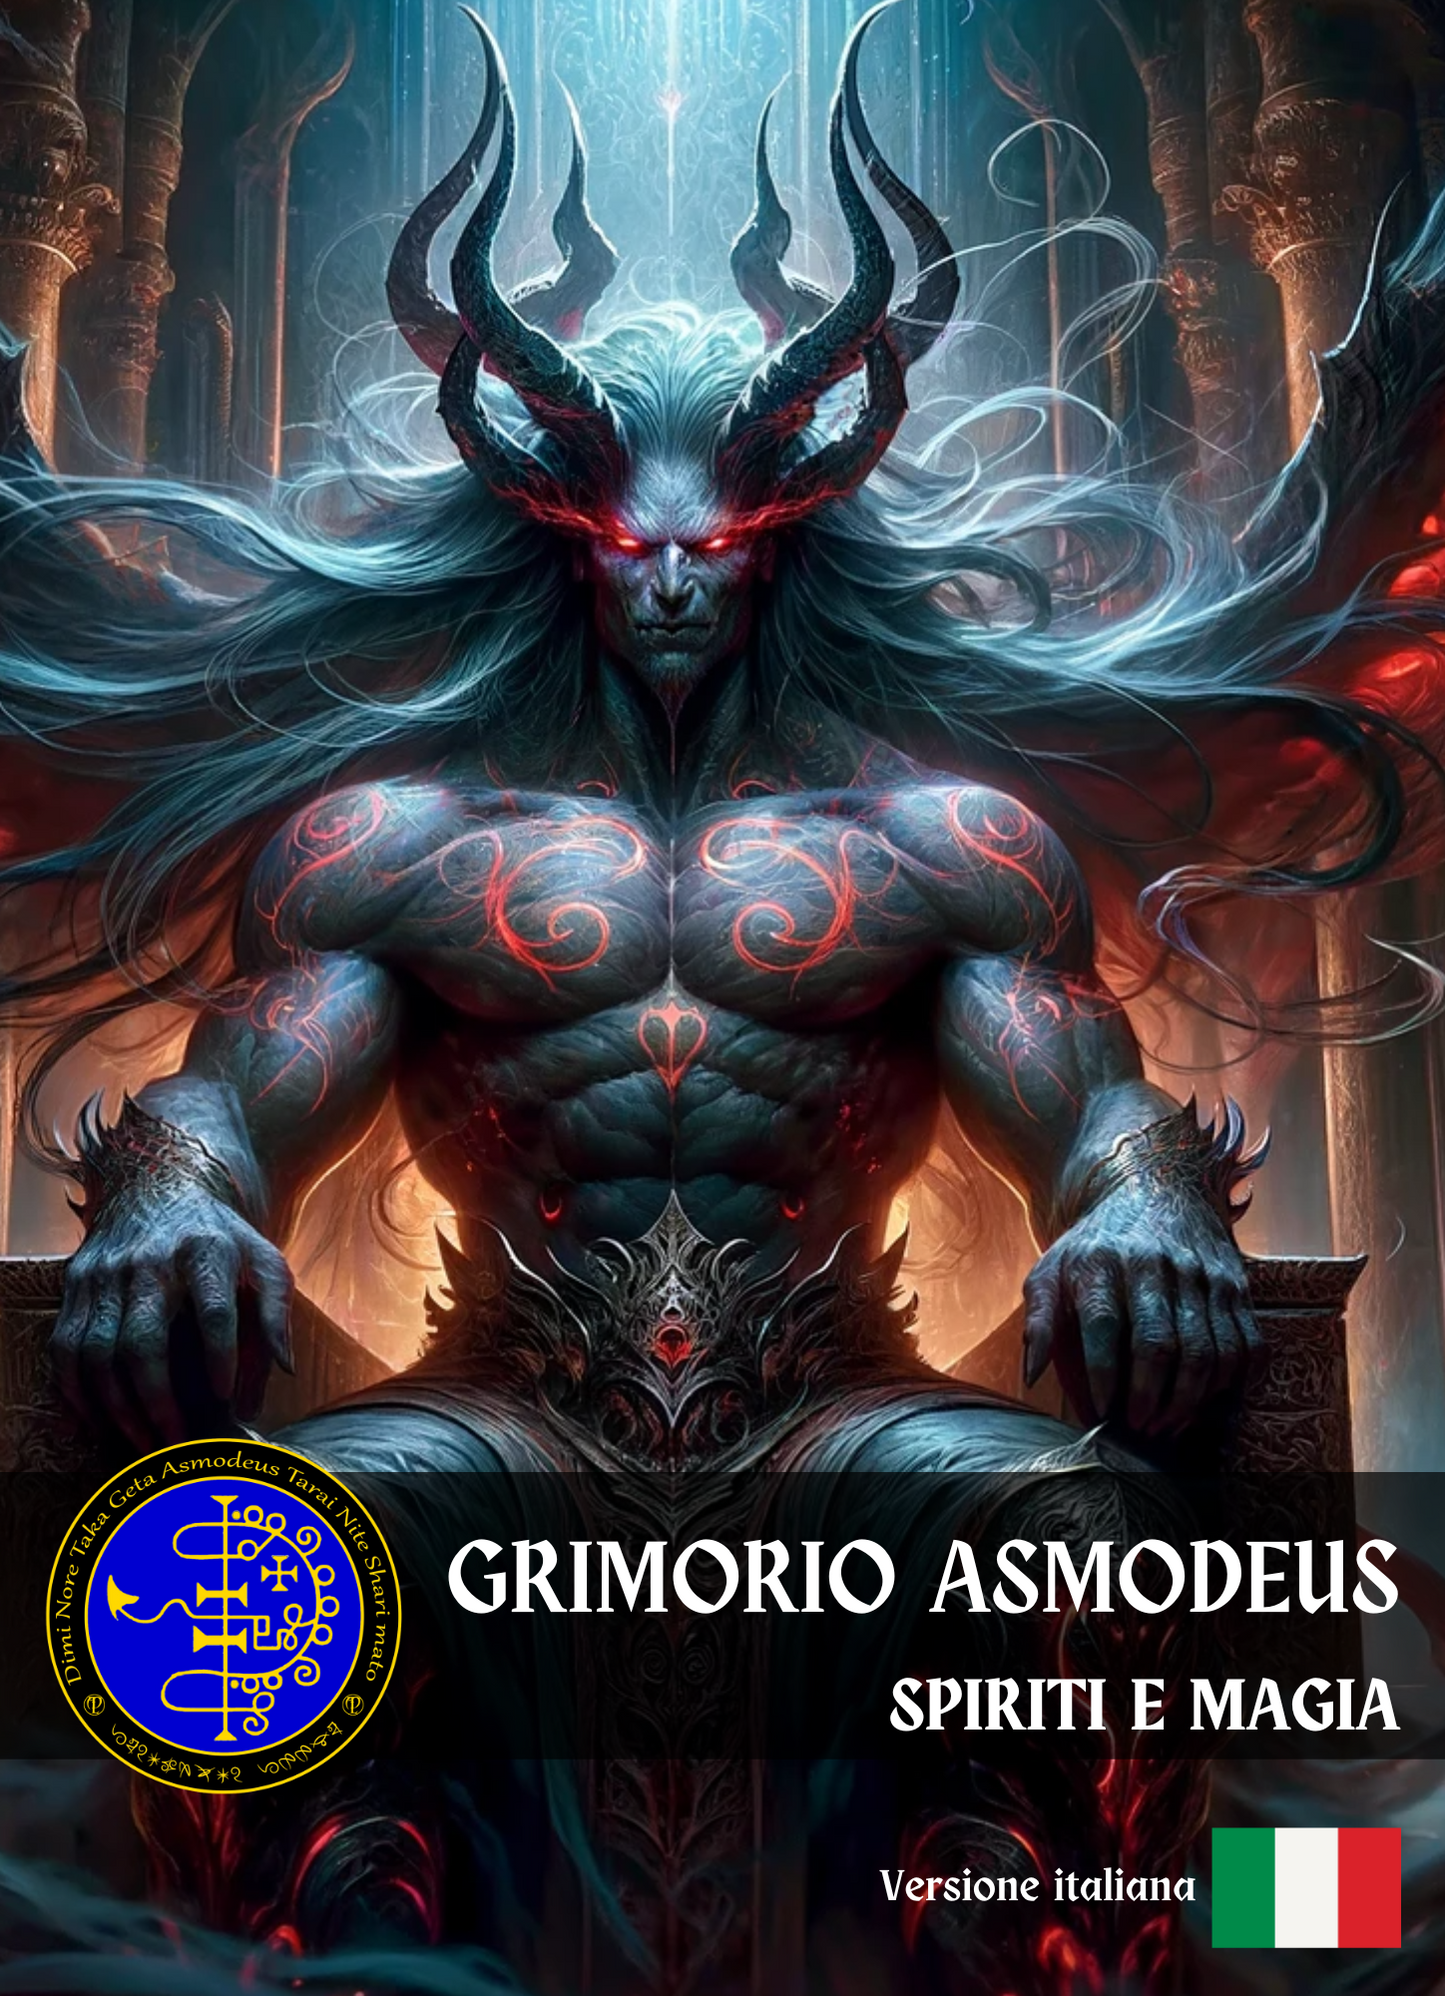 Grimoire of ASMODEUS Spells & Rituals for gambling, luck, worldly pleasures and to Empower Yourself - Abraxas Amulets ® Magic ♾️ Talismans ♾️ Startations